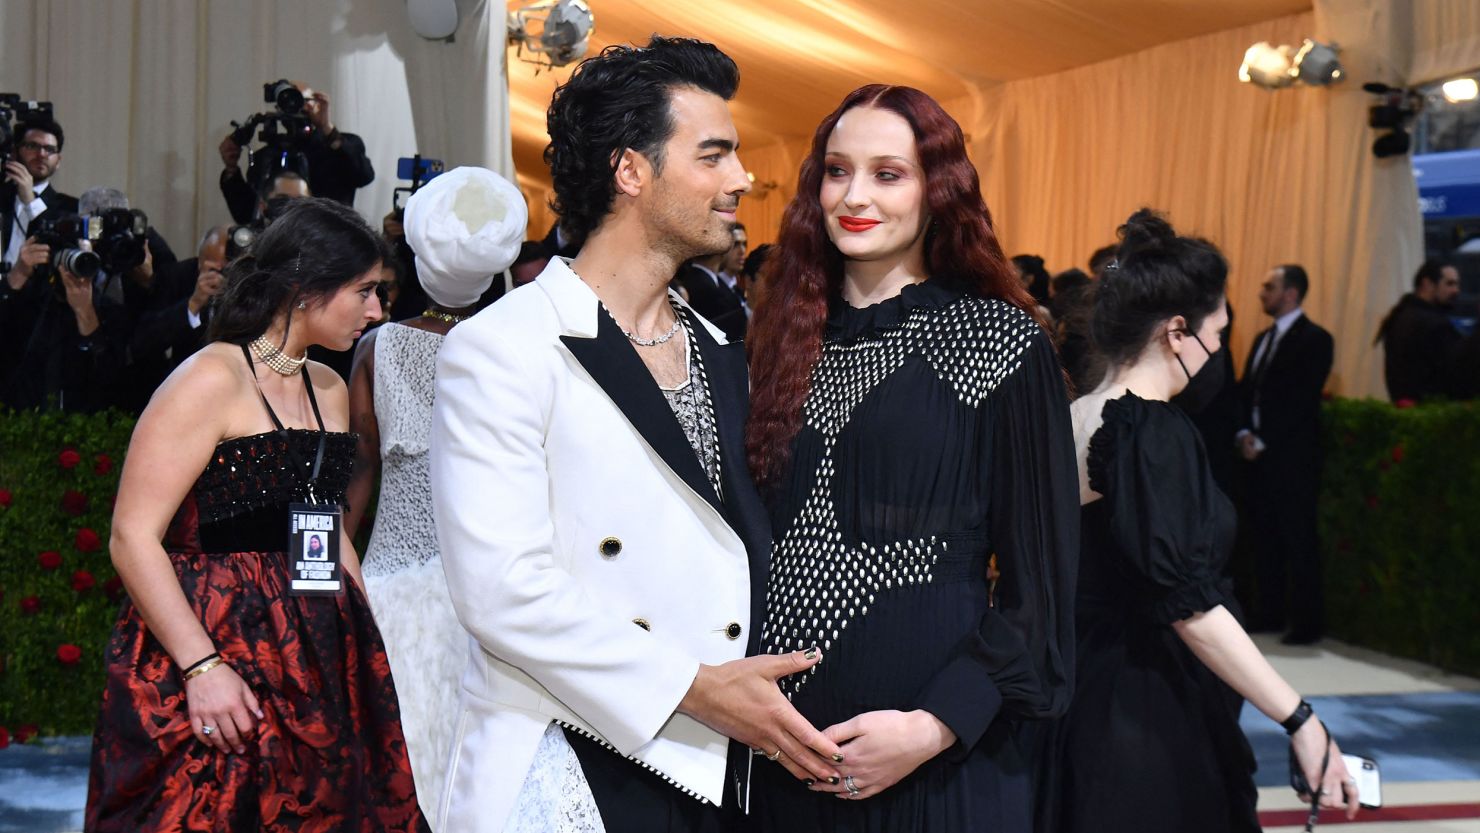 Joe Jonas and Sophie Turner, shown here in May, have welcomed their second child.